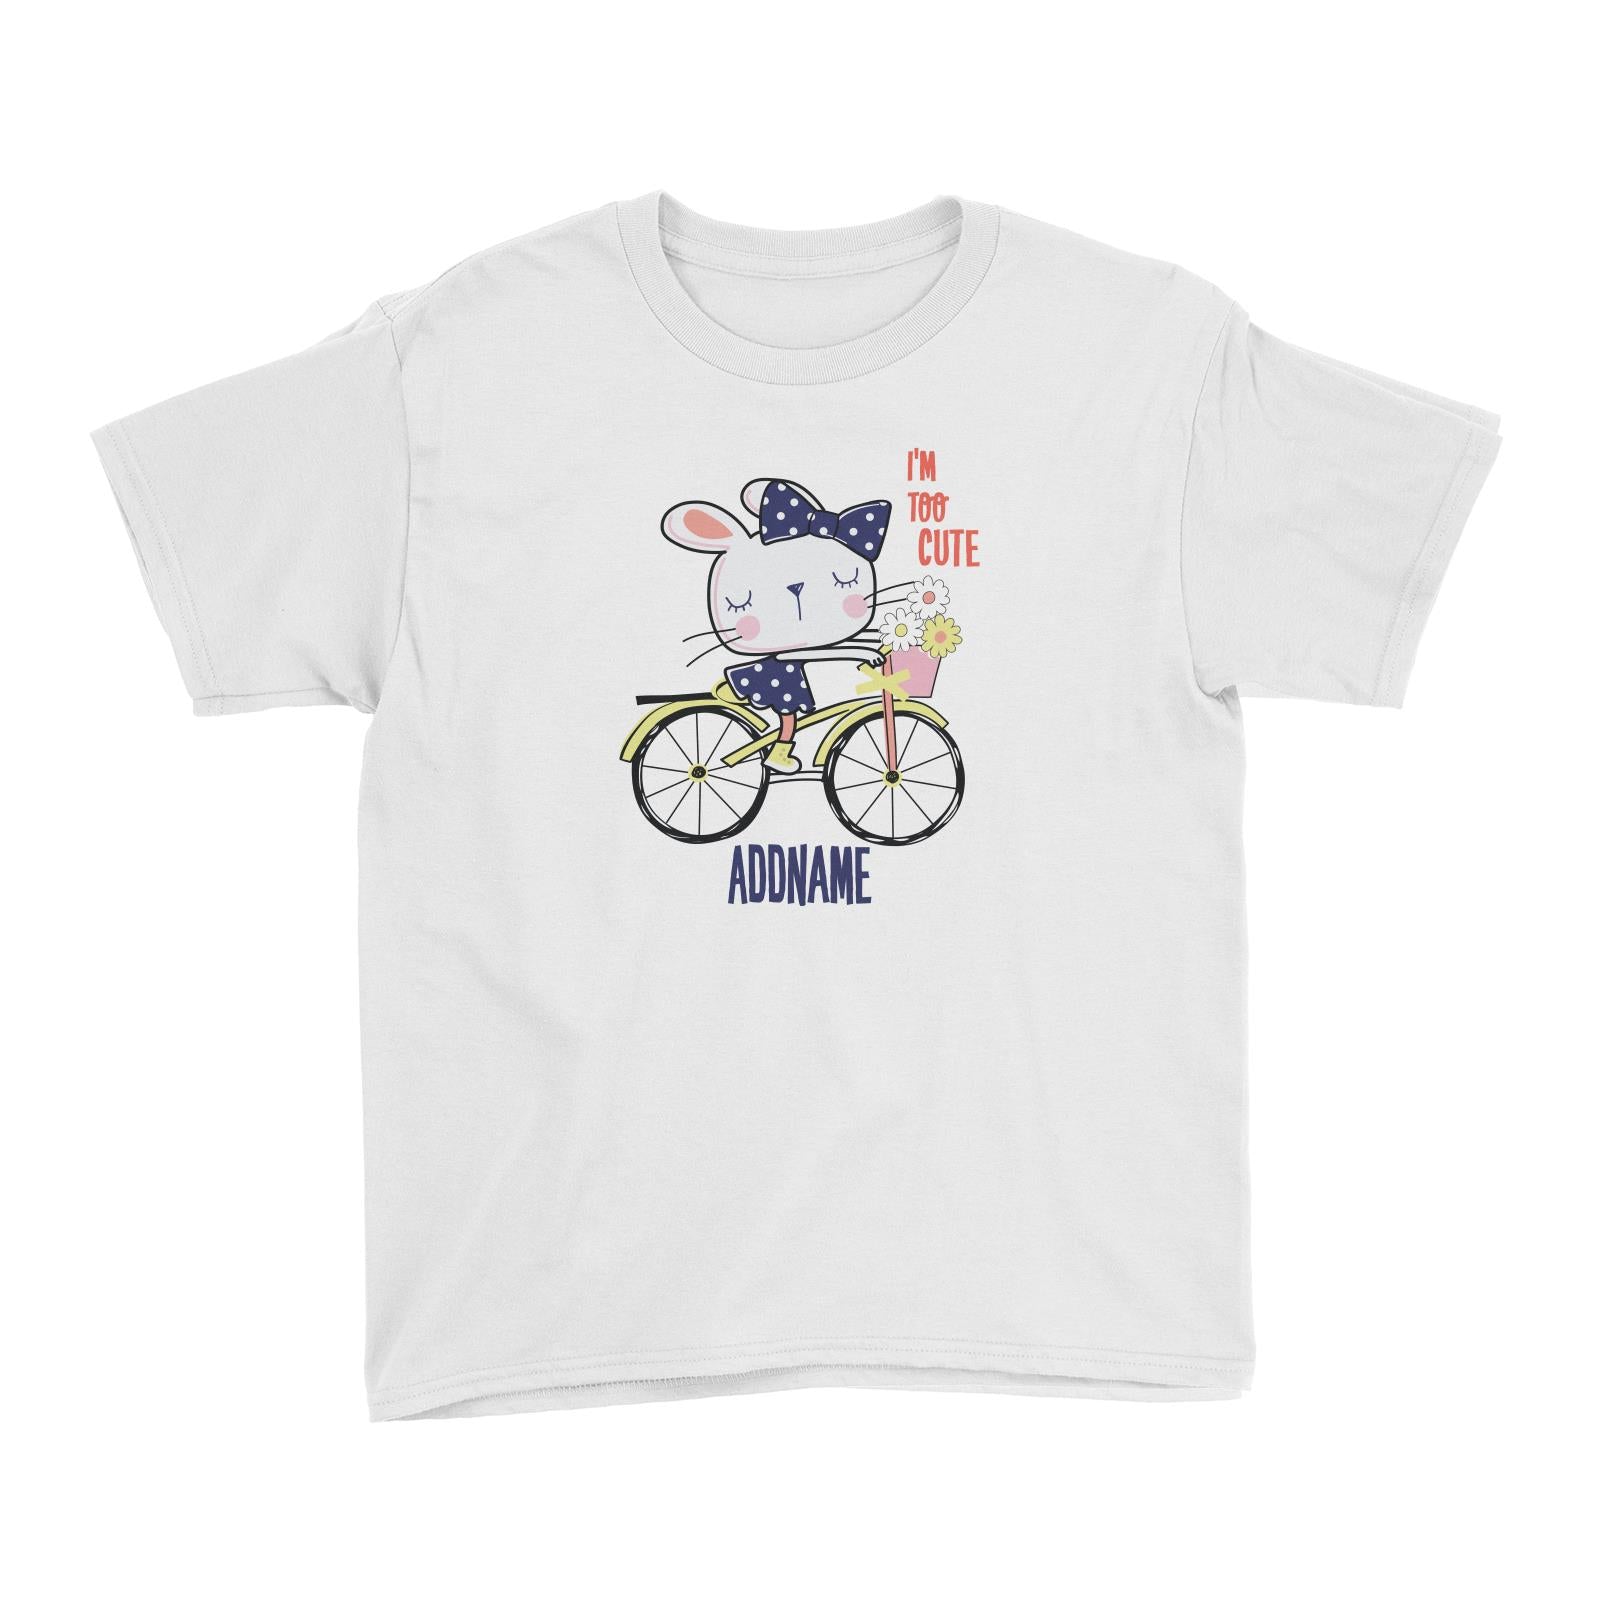 Cool Vibrant Series I'm Too Cute Bunny on Bicycle Addname Kid's T-Shirt [SALE]